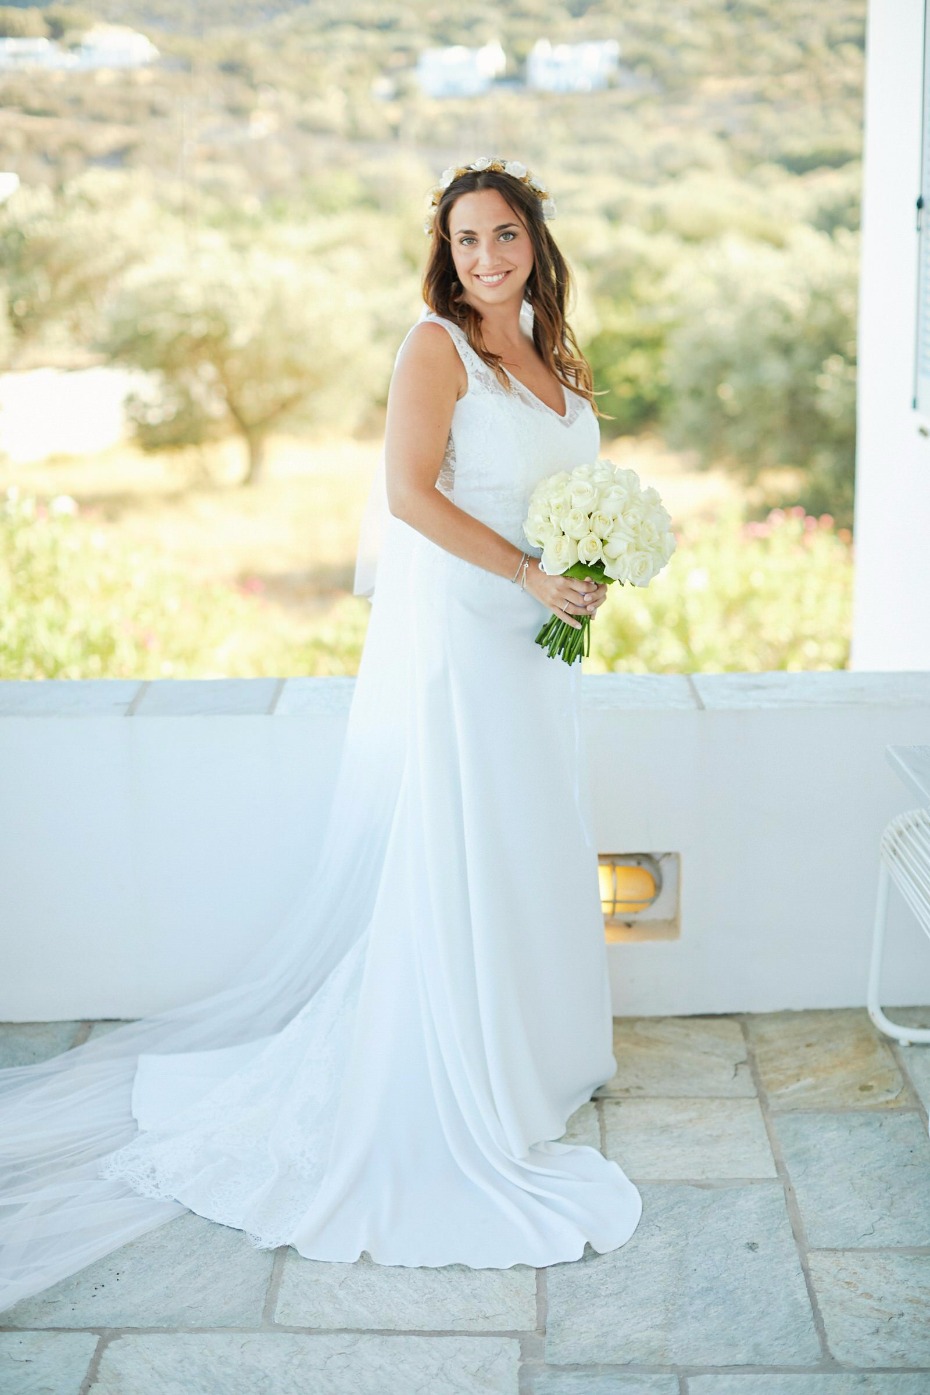 bride all dressed up for her Greek wedding day